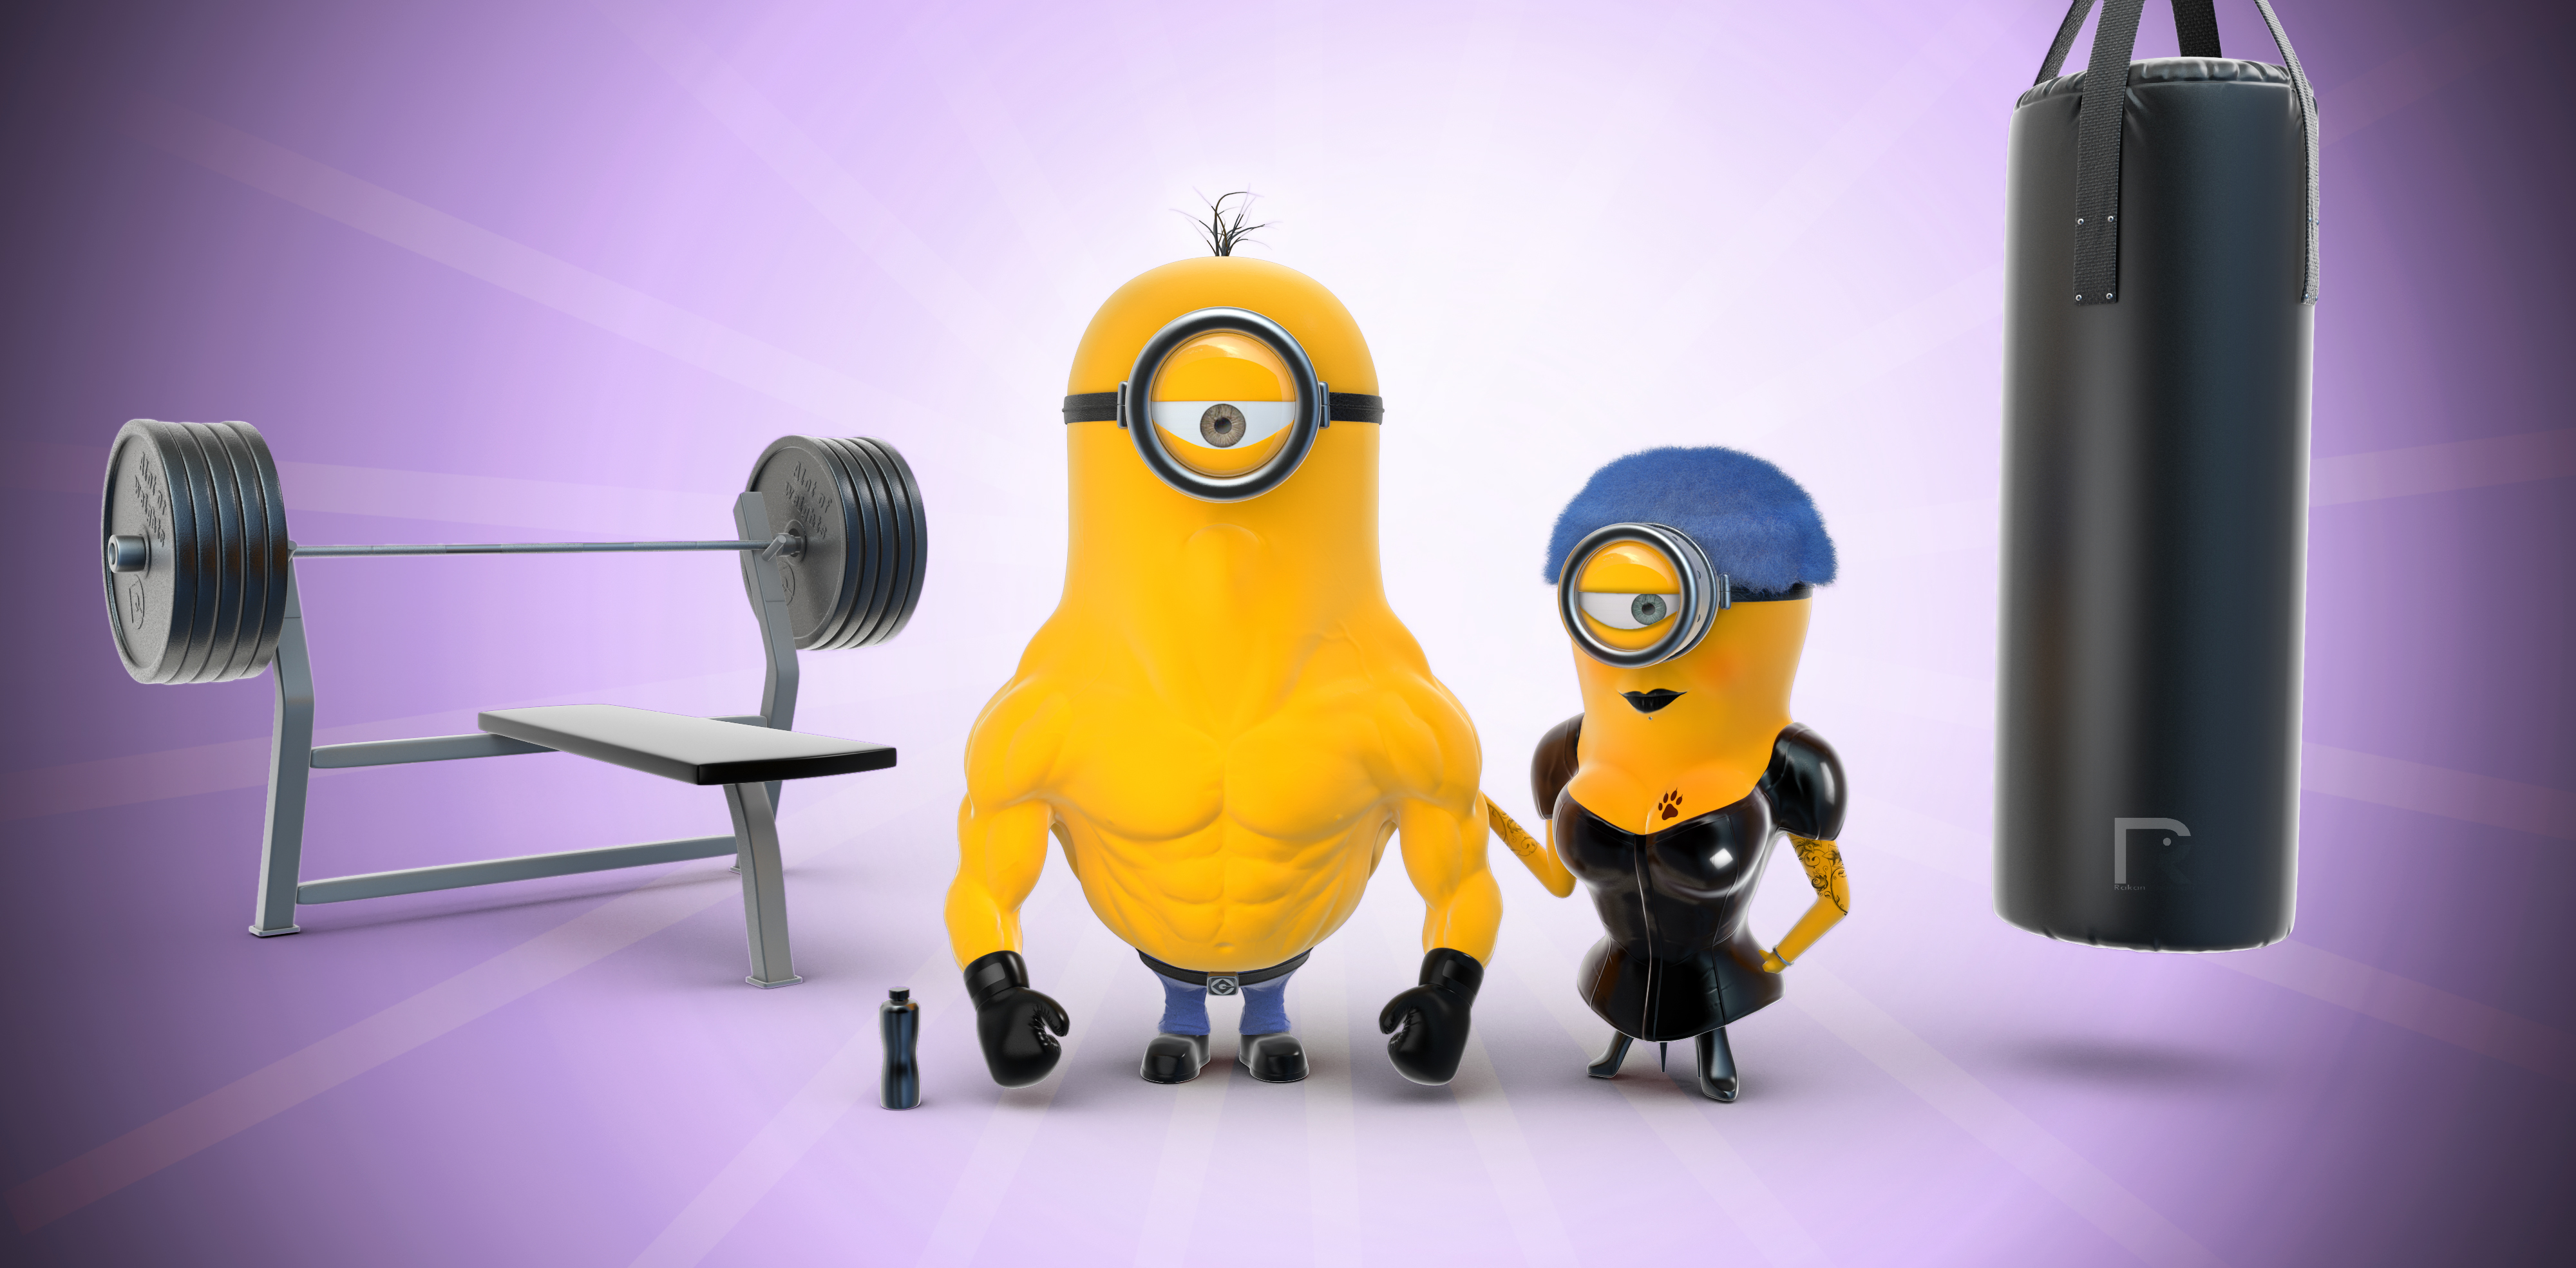 Minions Hd Wallpapers For Mobile Free Download